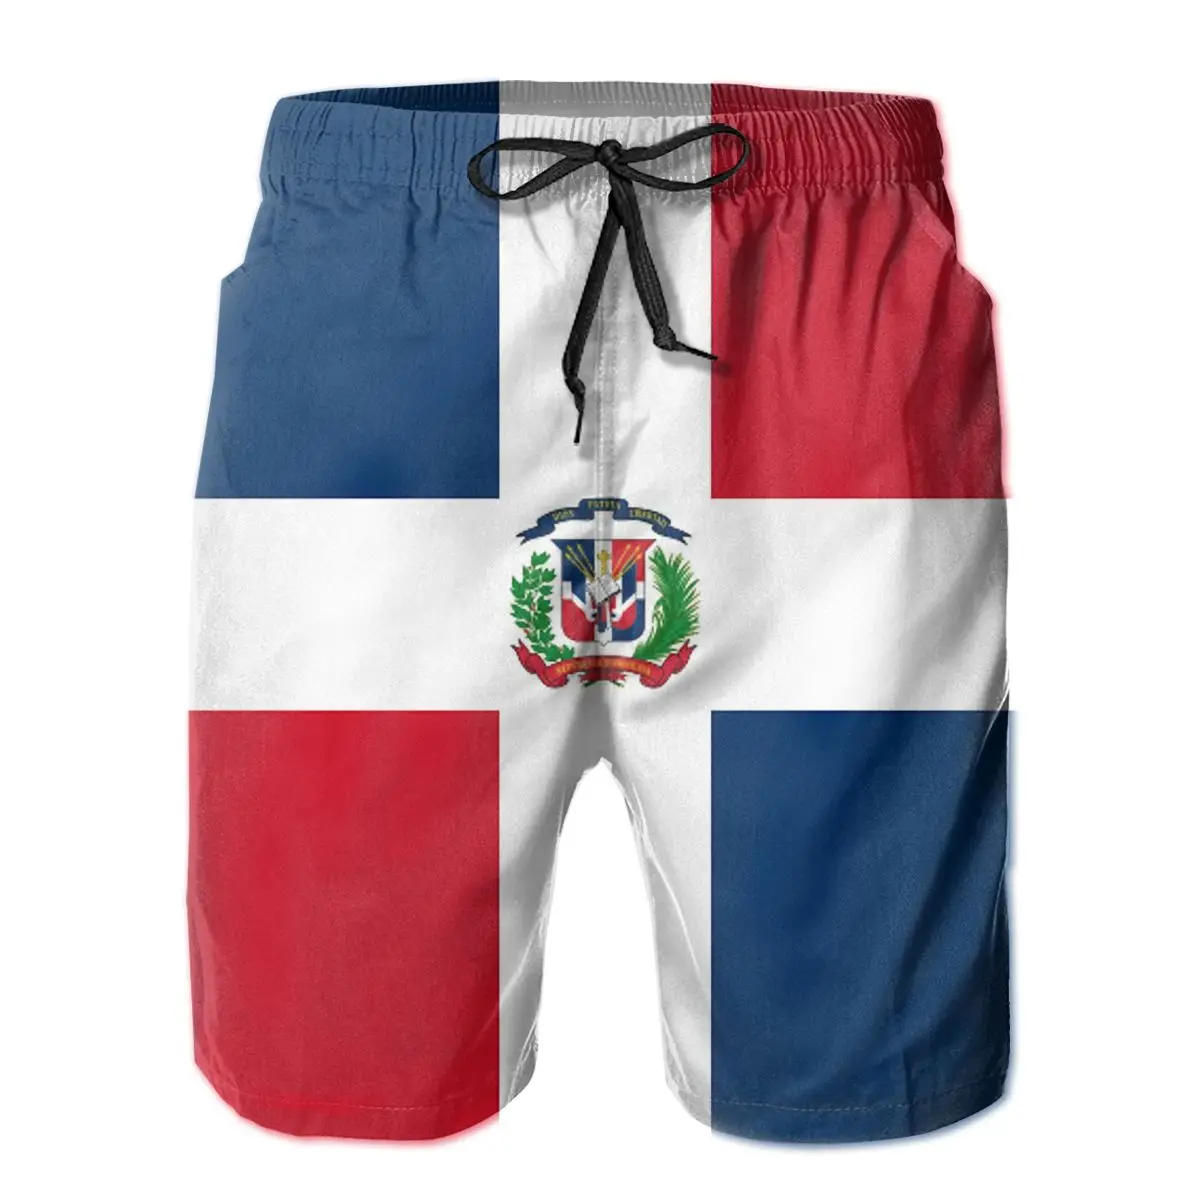 

Beach Breathable Quick Dry Novelty R333 running Dominican Republic Flag Hawaii Pants